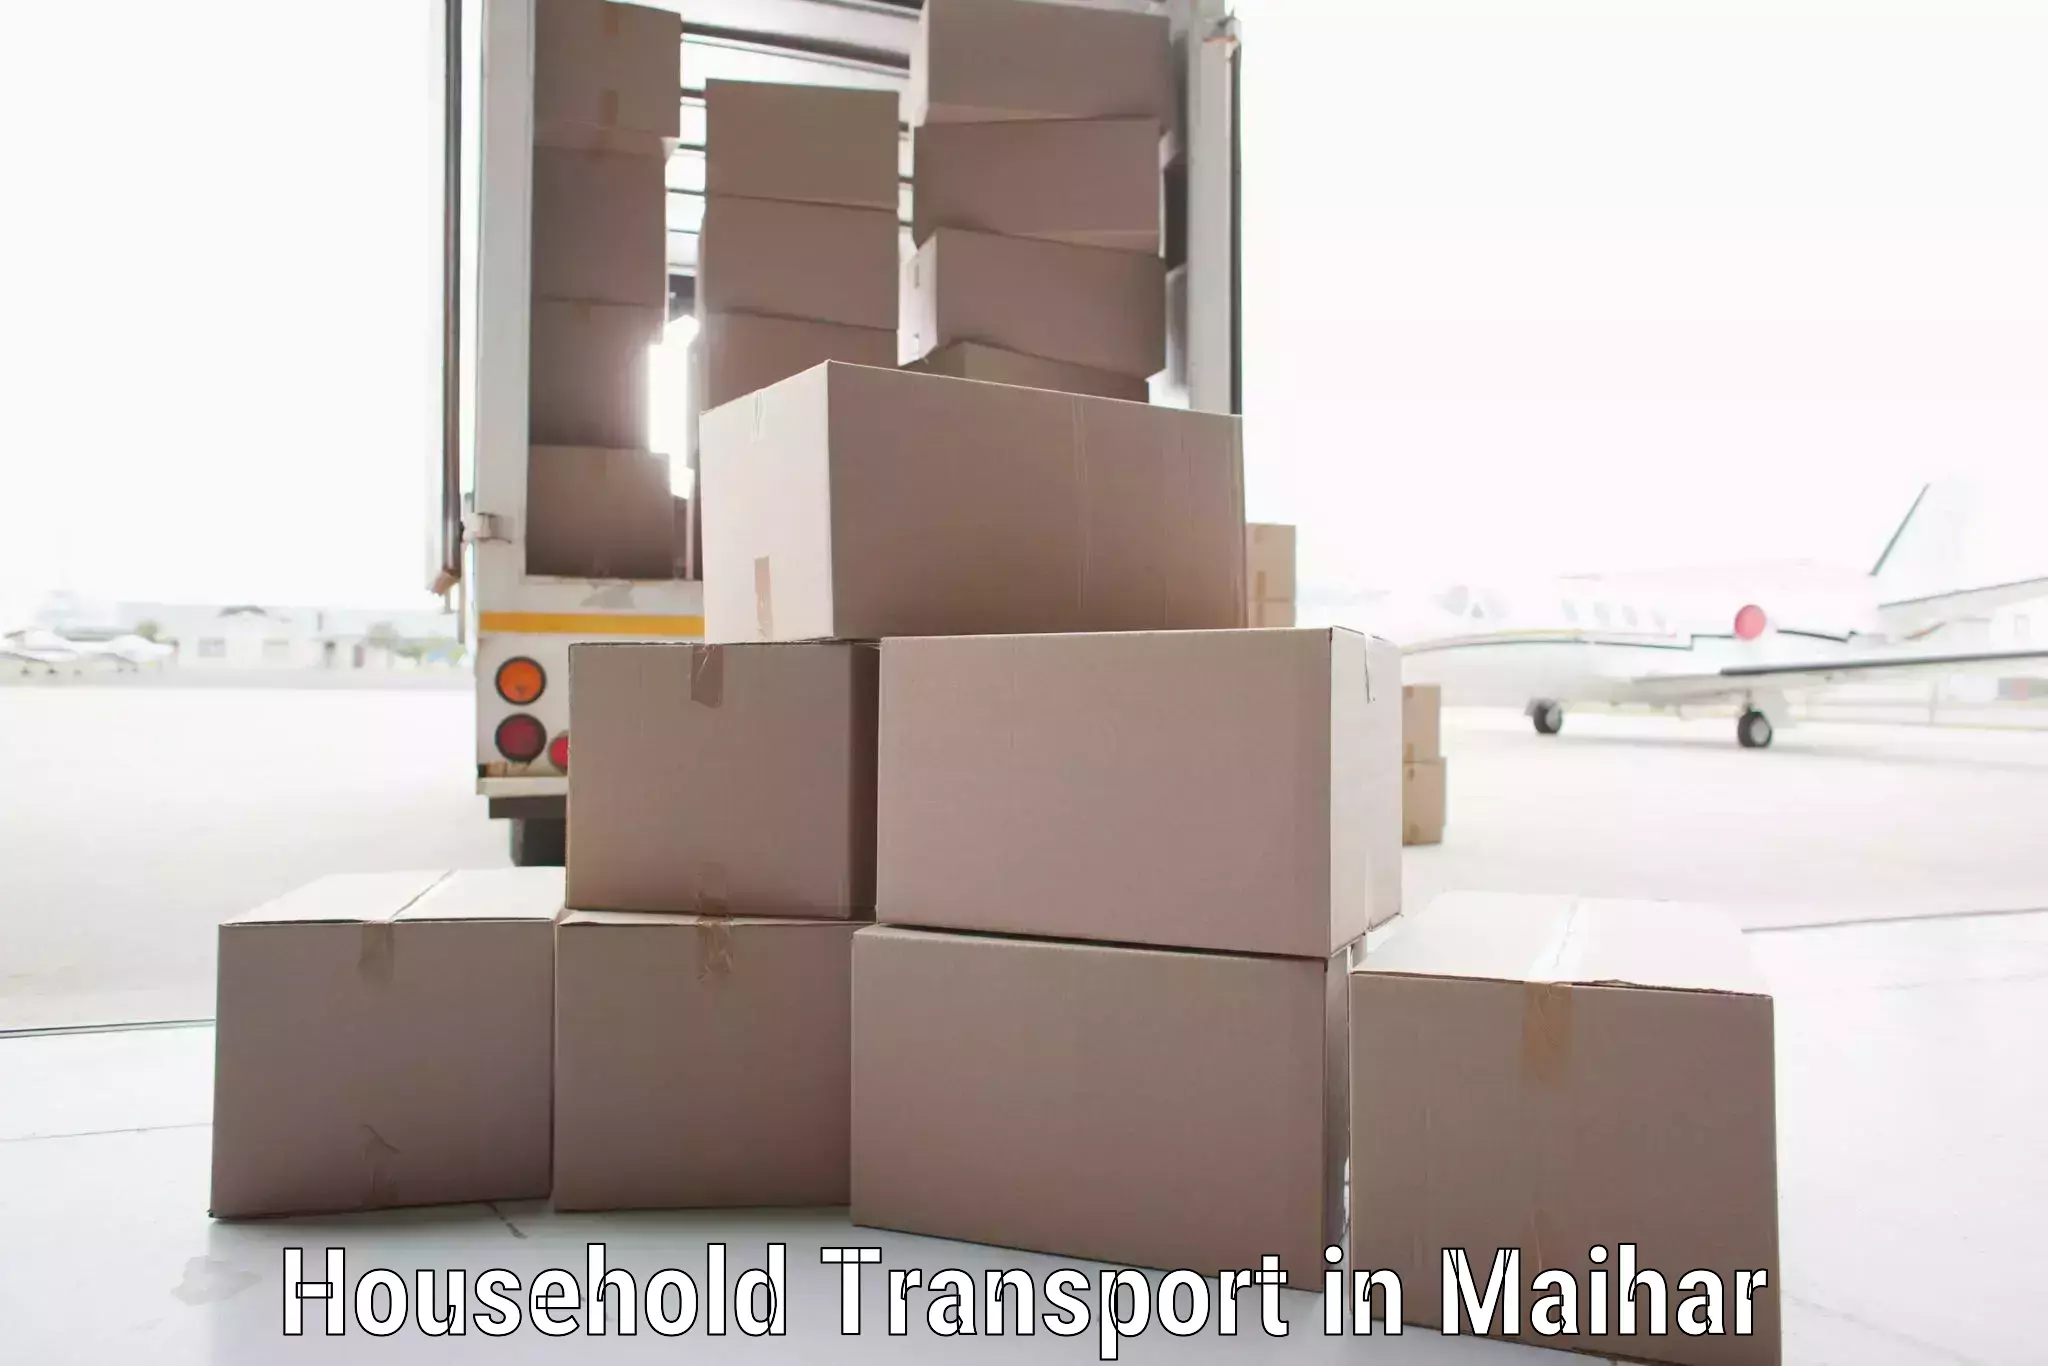 Household goods transporters in Maihar